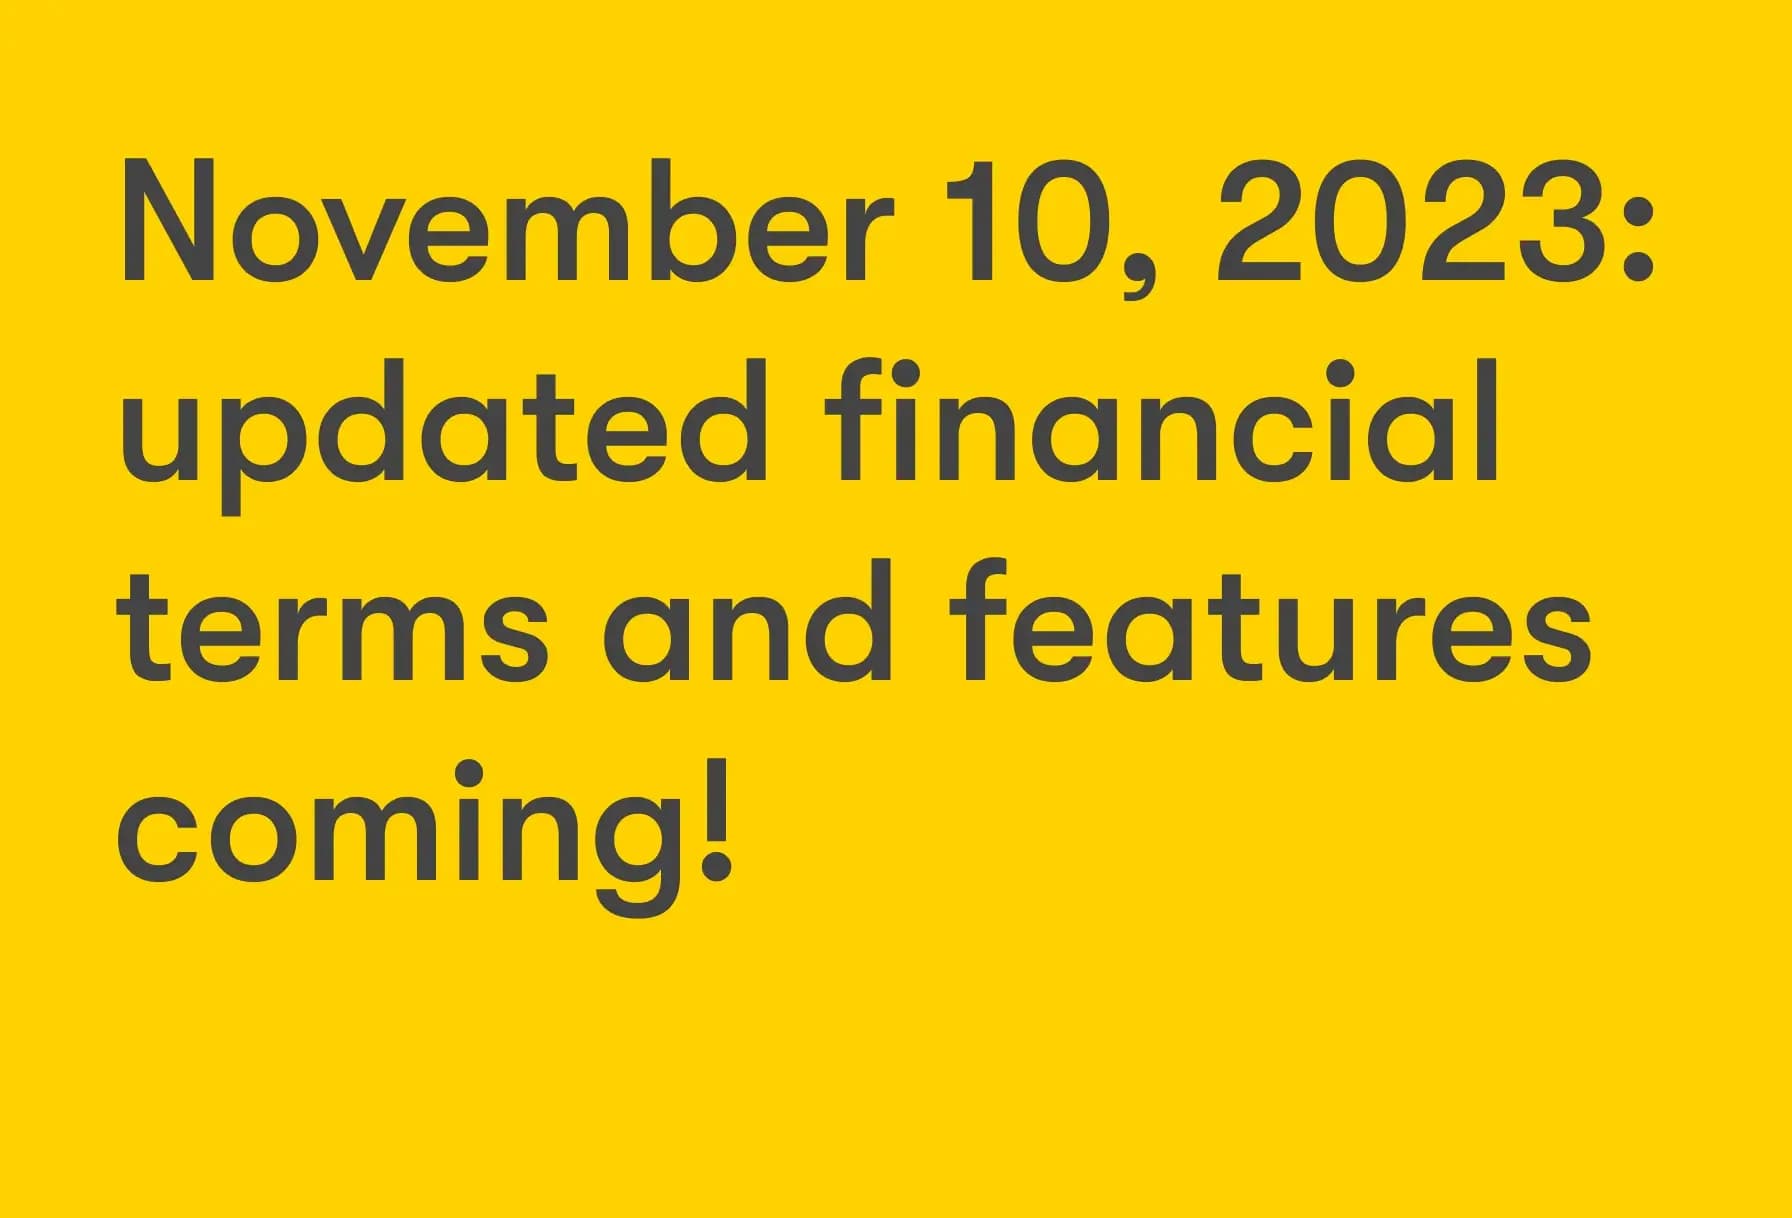 November 10, 2023: updated financial terms and features coming!